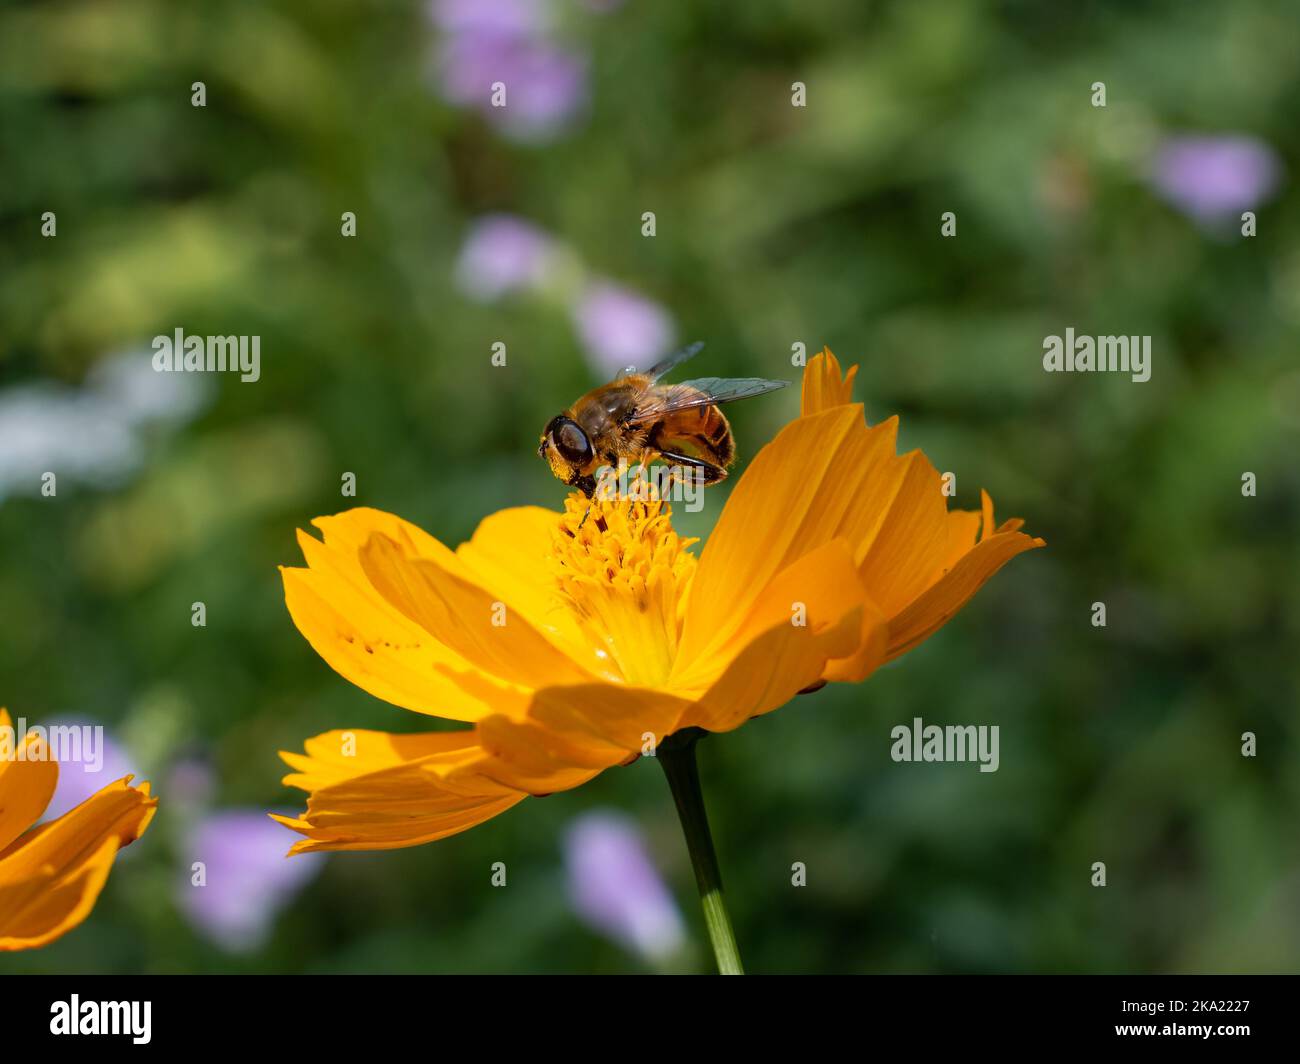 Hoverfly sitting on a yellow blossom. The insect is eating nectar out of a flower. Close-up of a wild animal in a natural environment. Stock Photo